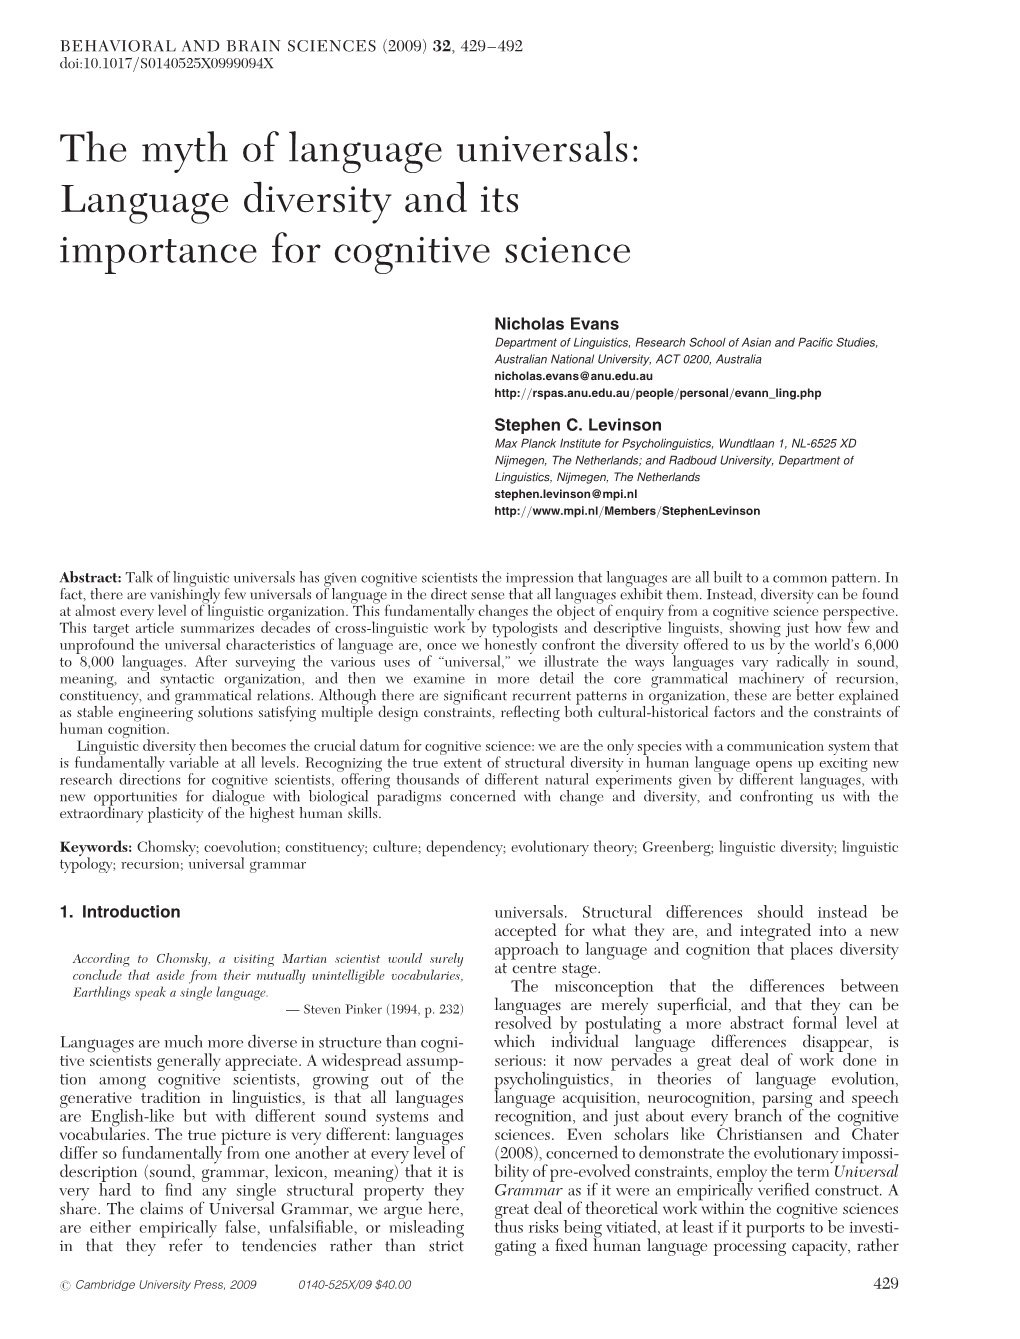 The Myth of Language Universals: Language Diversity and Its Importance for Cognitive Science